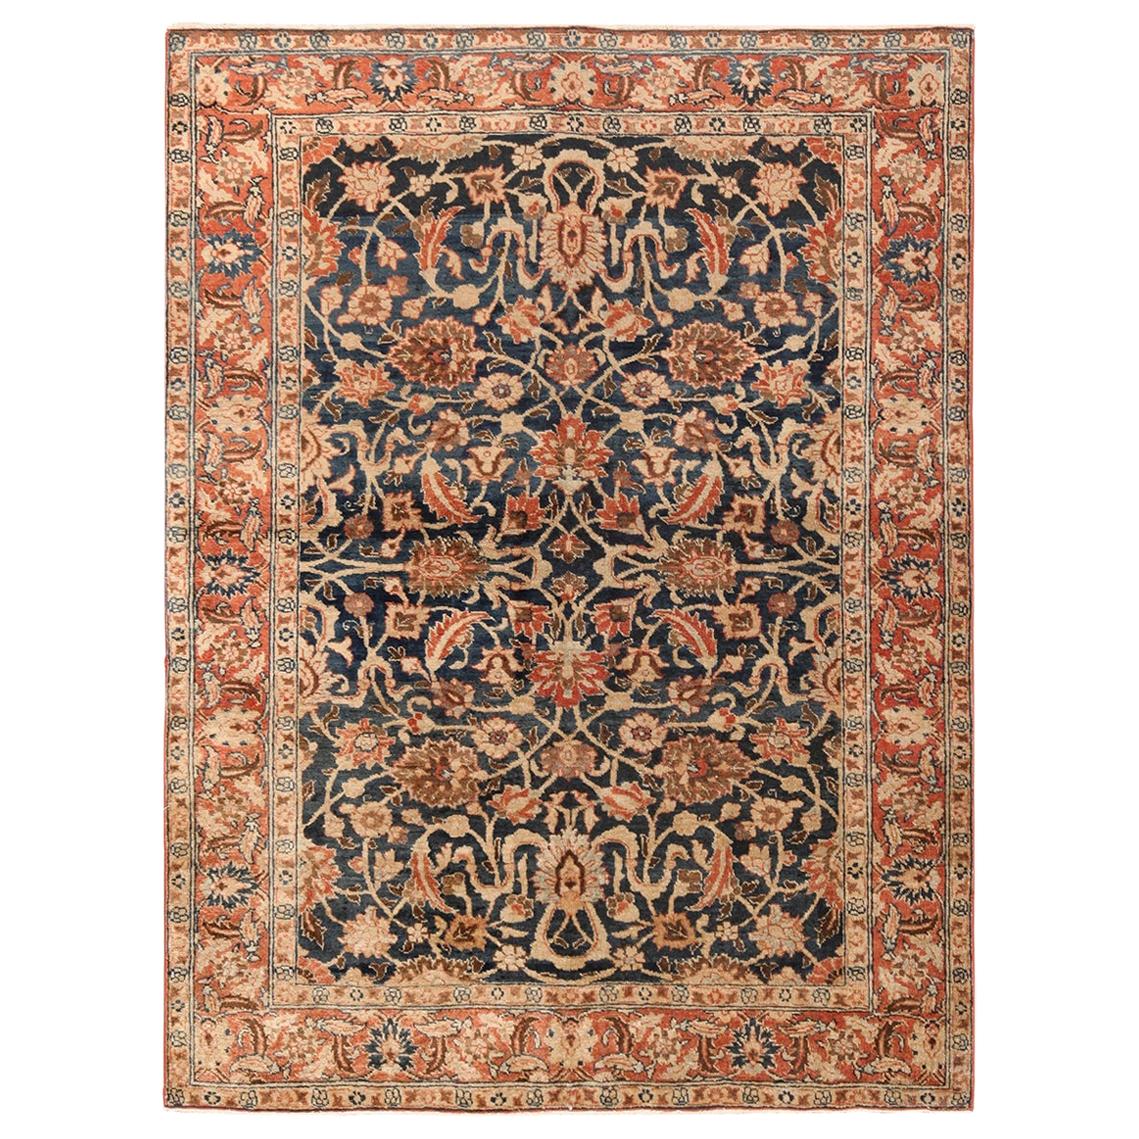 Small Size Blue Background Antique Persian Tabriz Rug. Size: 4' 7" x 6' 4" 